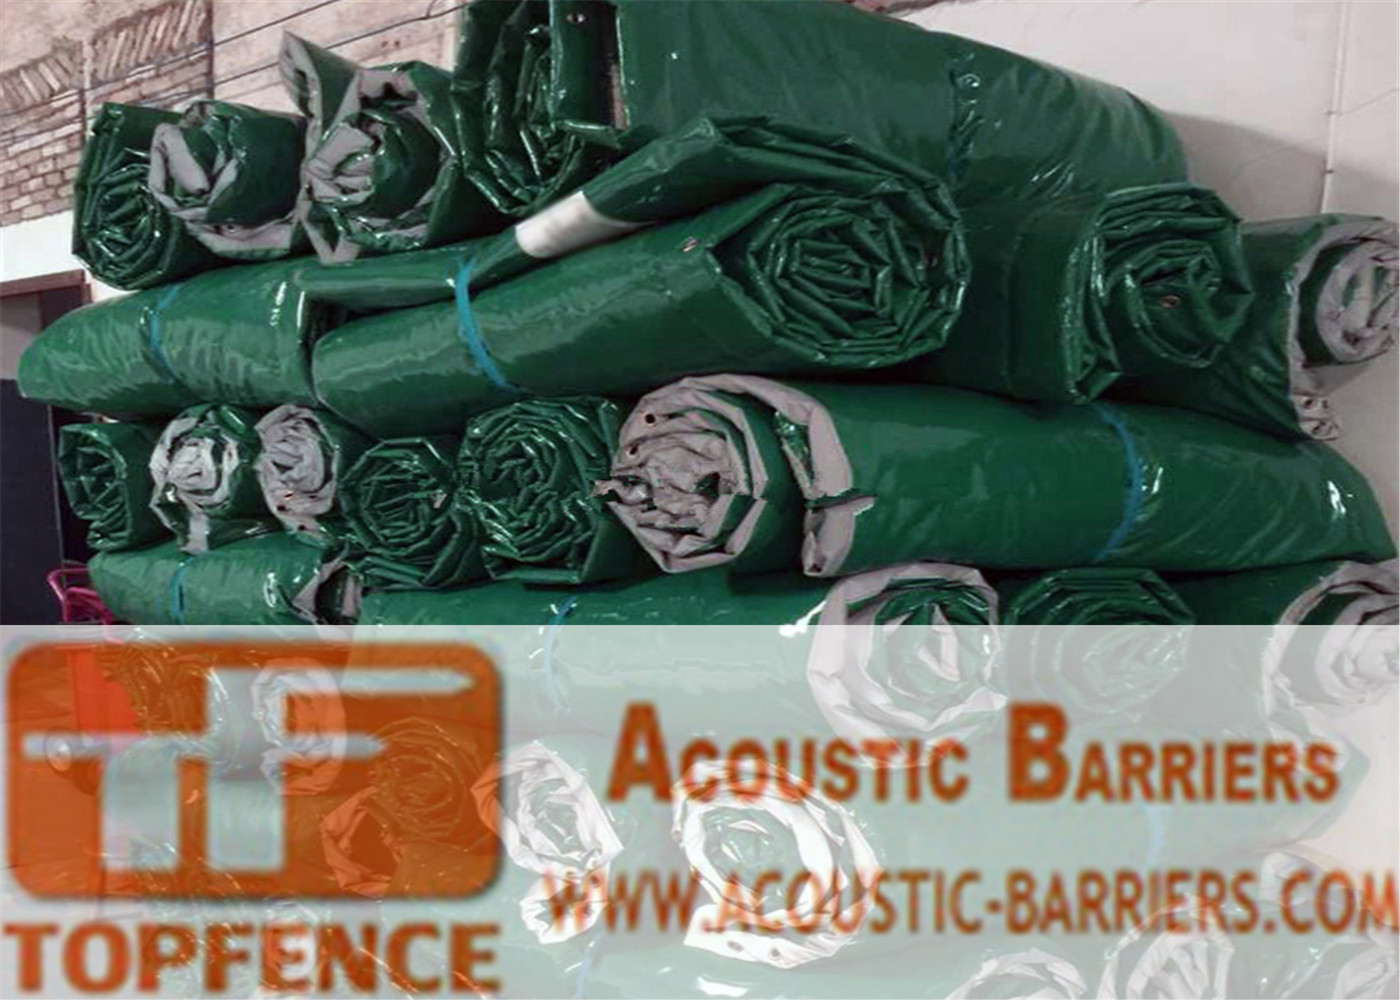  Temporary Sound Acoustic Barrier Mat Temporary Fencing Hire Sound Vinyl Barrier for Metal Cut Saw in Construction Sites Manufactures